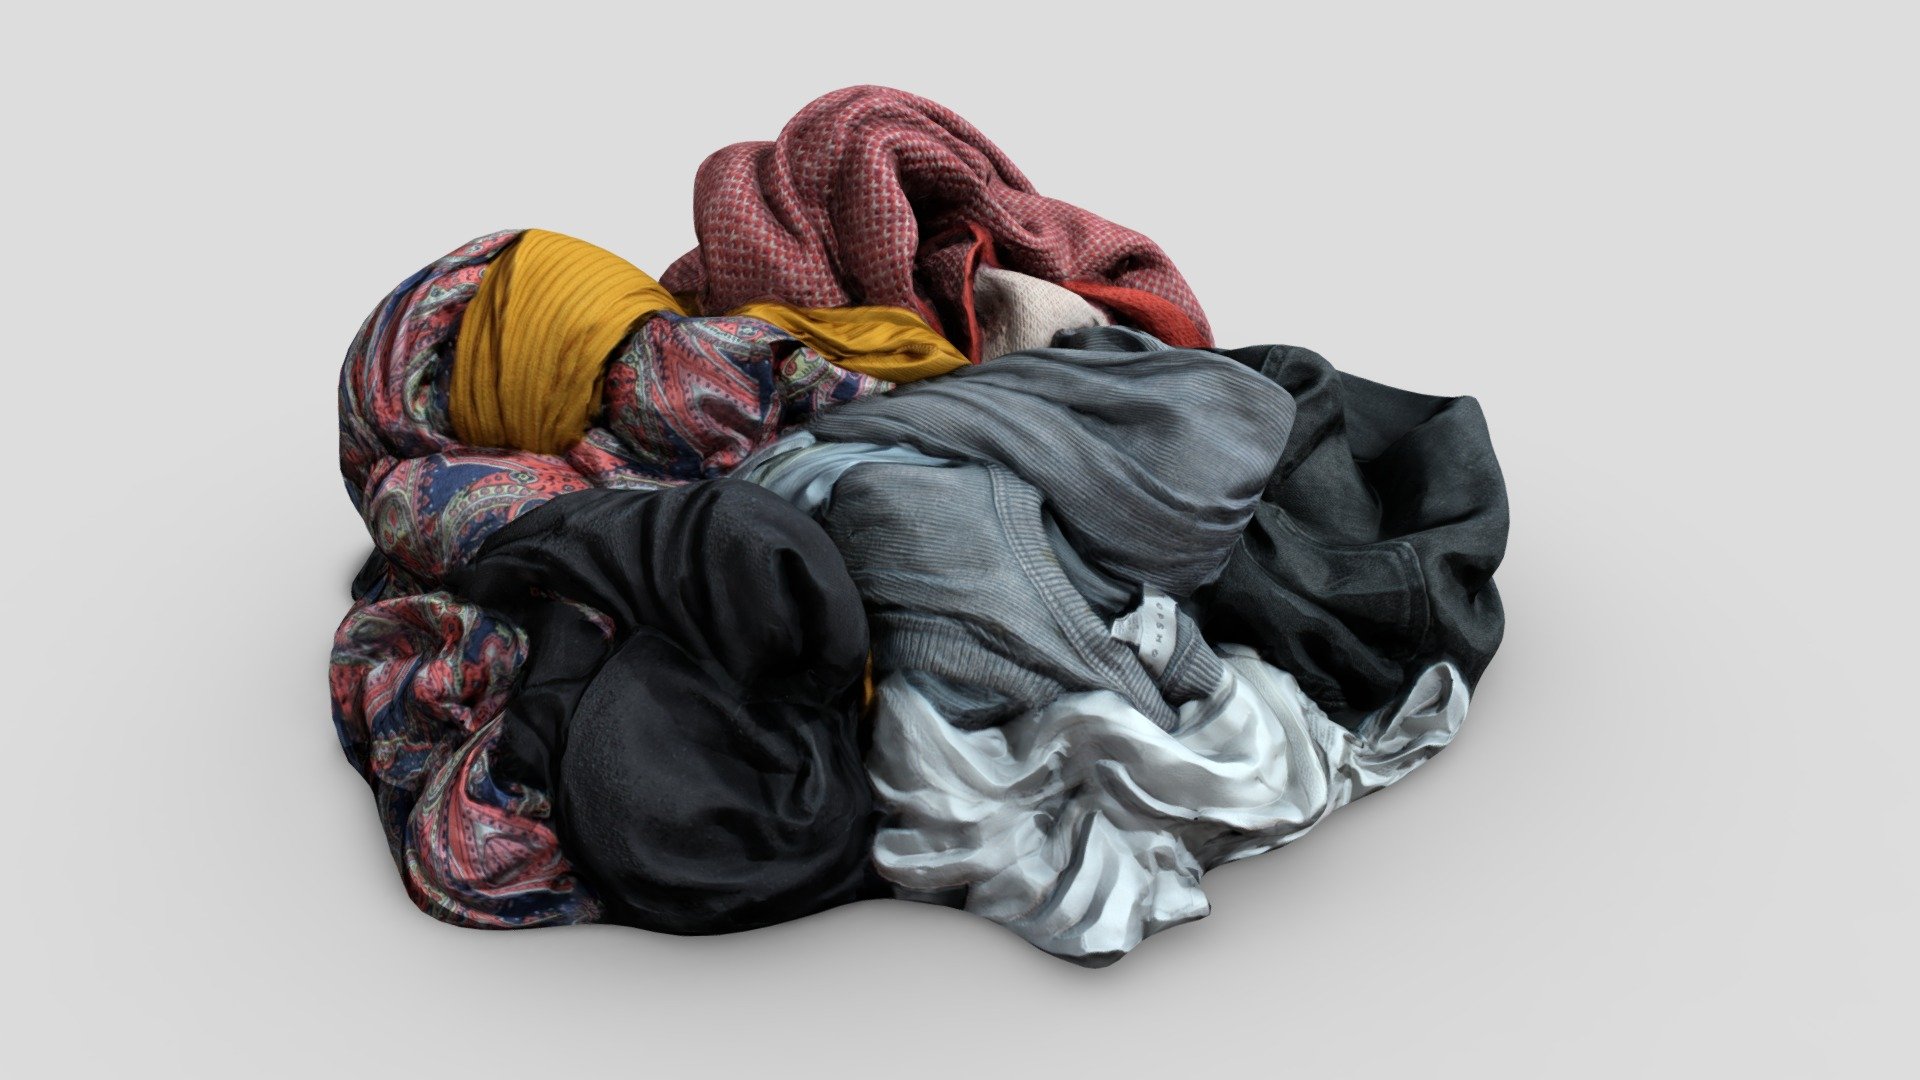 A small pile of clothes on the floor, low poly and game ready.

Fully UV Mapped. Complete with Colour, Ambient Occlusion and Normal Map textures. Colour Textures Included at 2048x2048 as well as 4096x4096 All Other Textures Included at 1024x1024 aas well as 2048x2048 Includes both OBJ and FBX formats as well as MAX 3d model